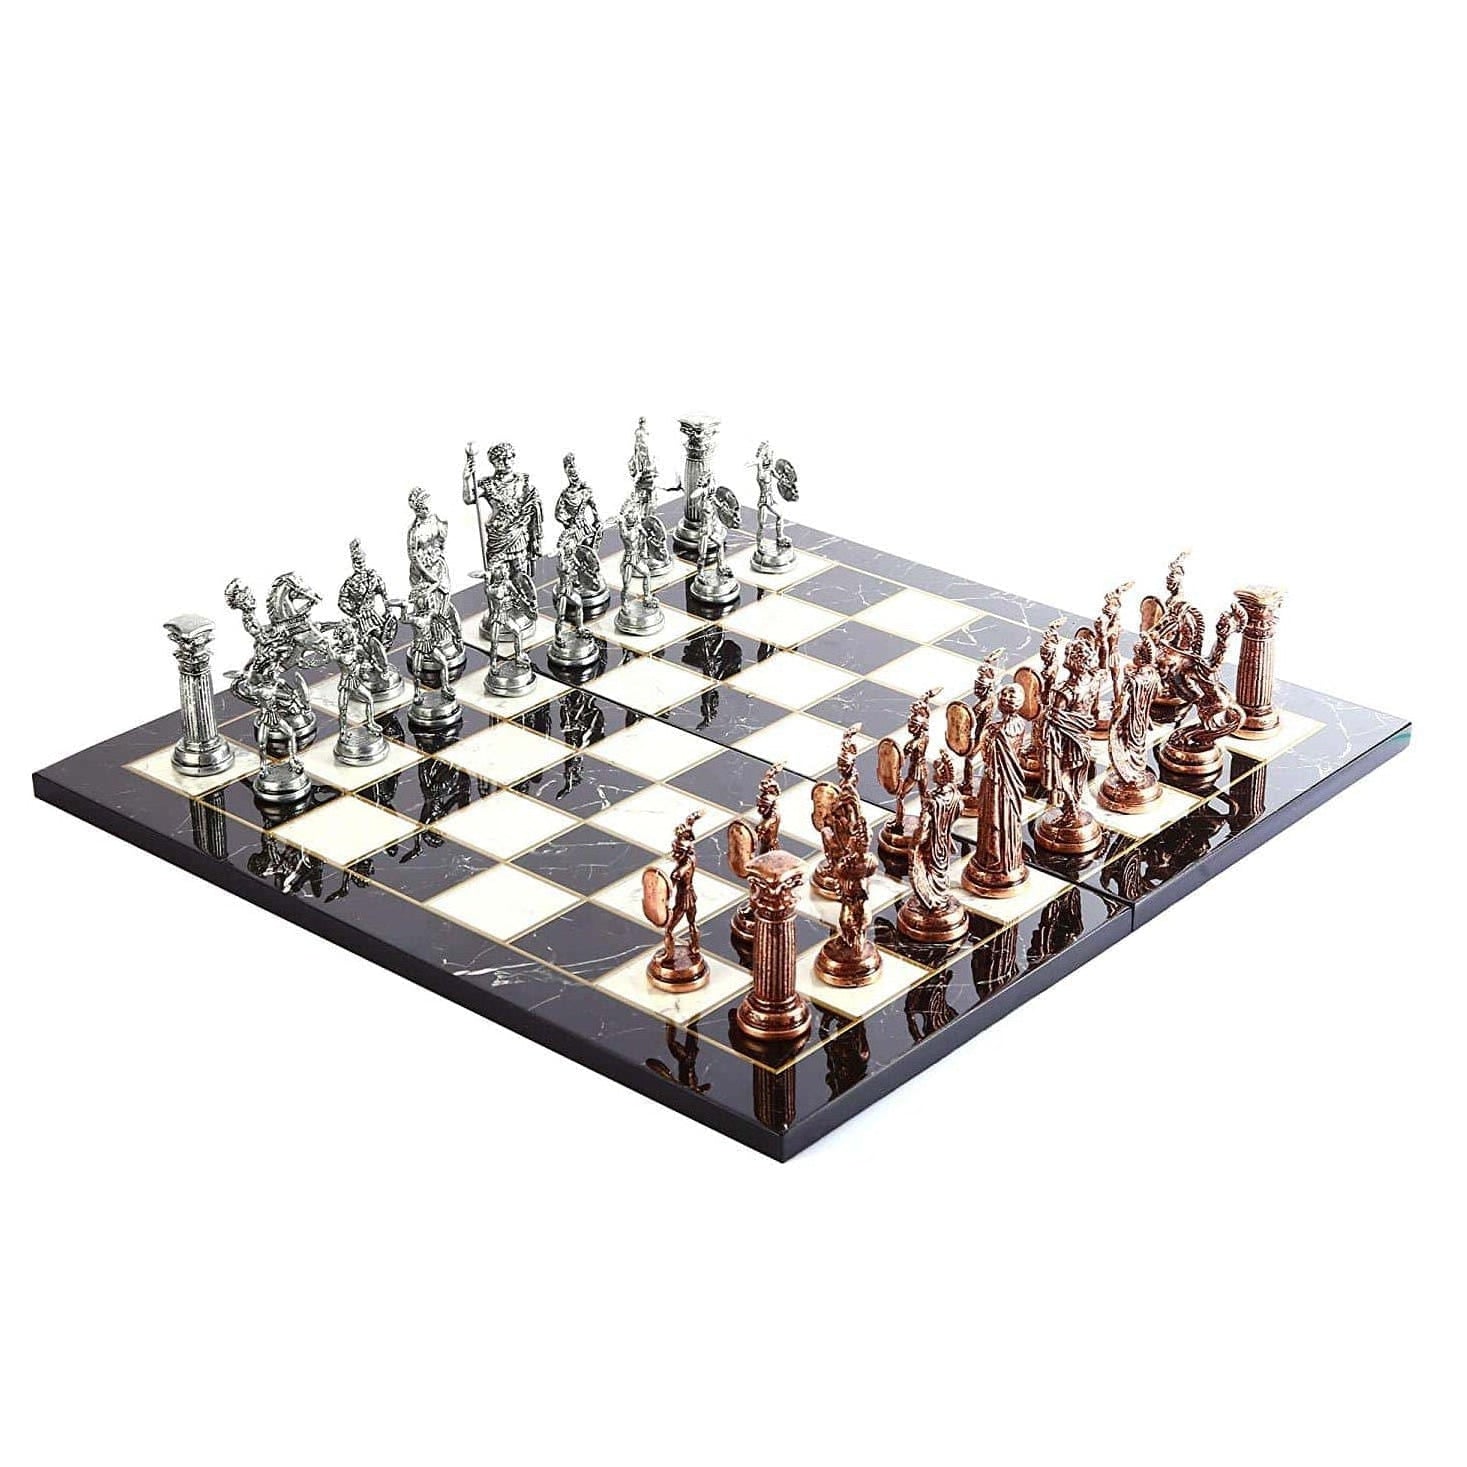 Fine Finish Antique Chess Board | Marble Look Board | Antique Roman Chess Pieces | whatagift.com.au.